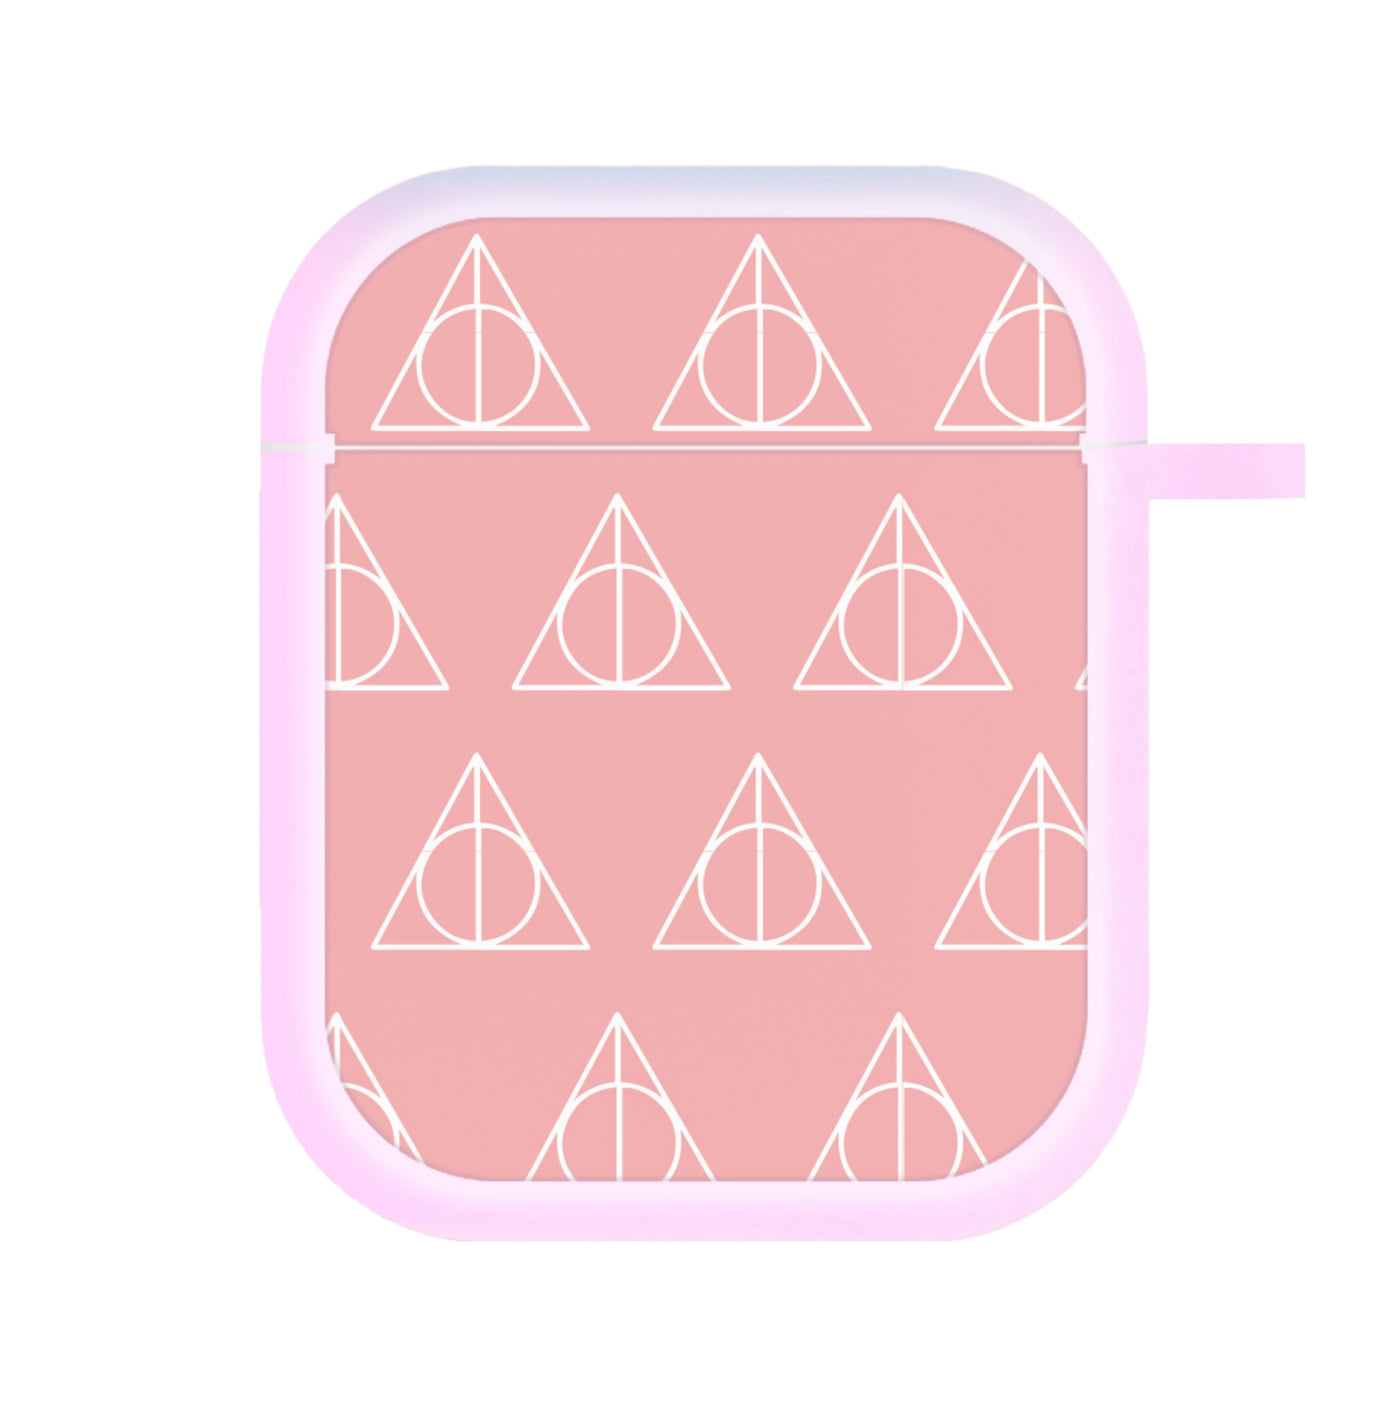 The Deathly Hallows Symbol Pattern - Harry Potter AirPods Case